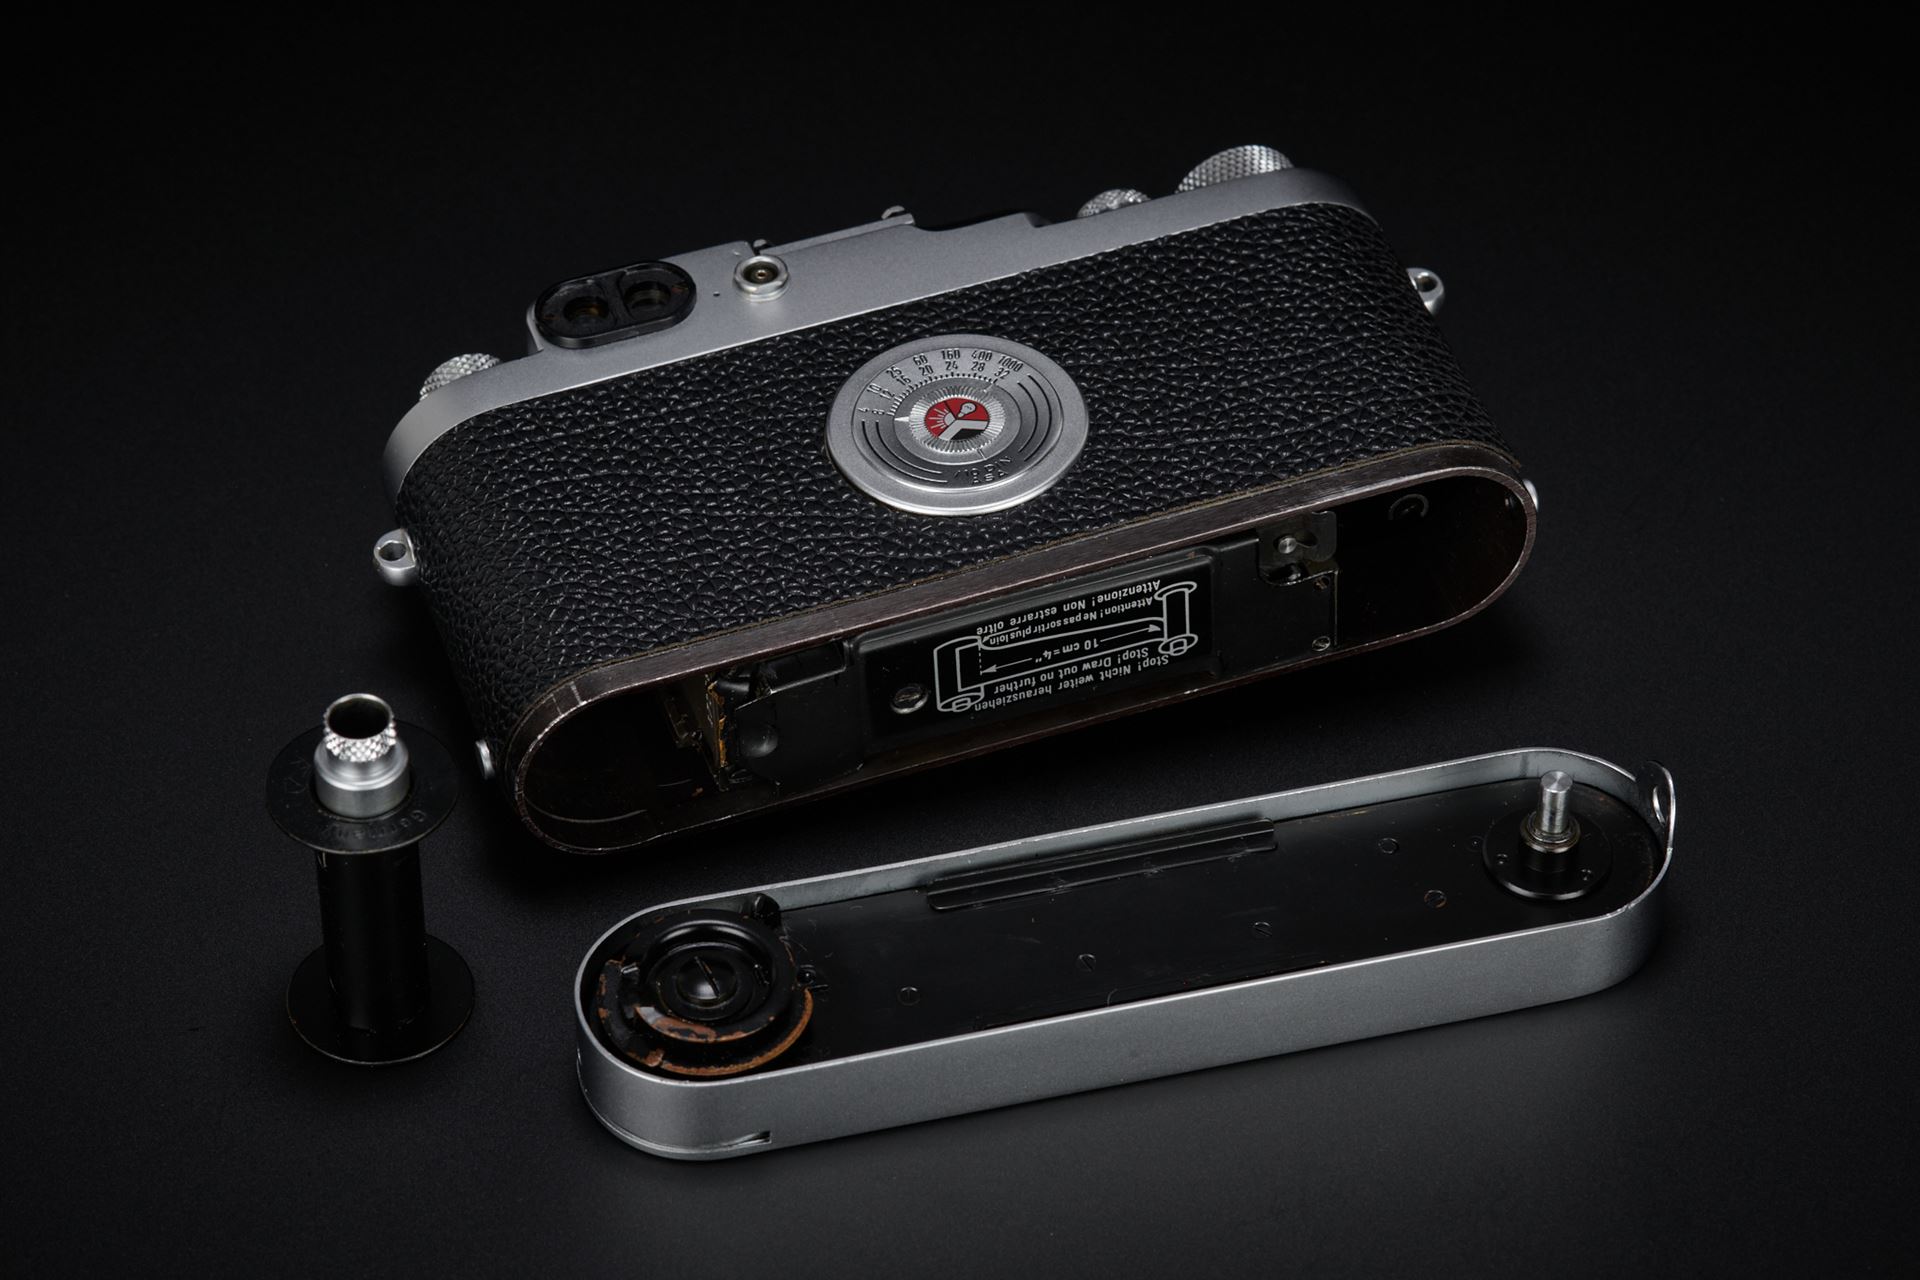 Picture of Leica IIIG Chrome w/ Leicavit